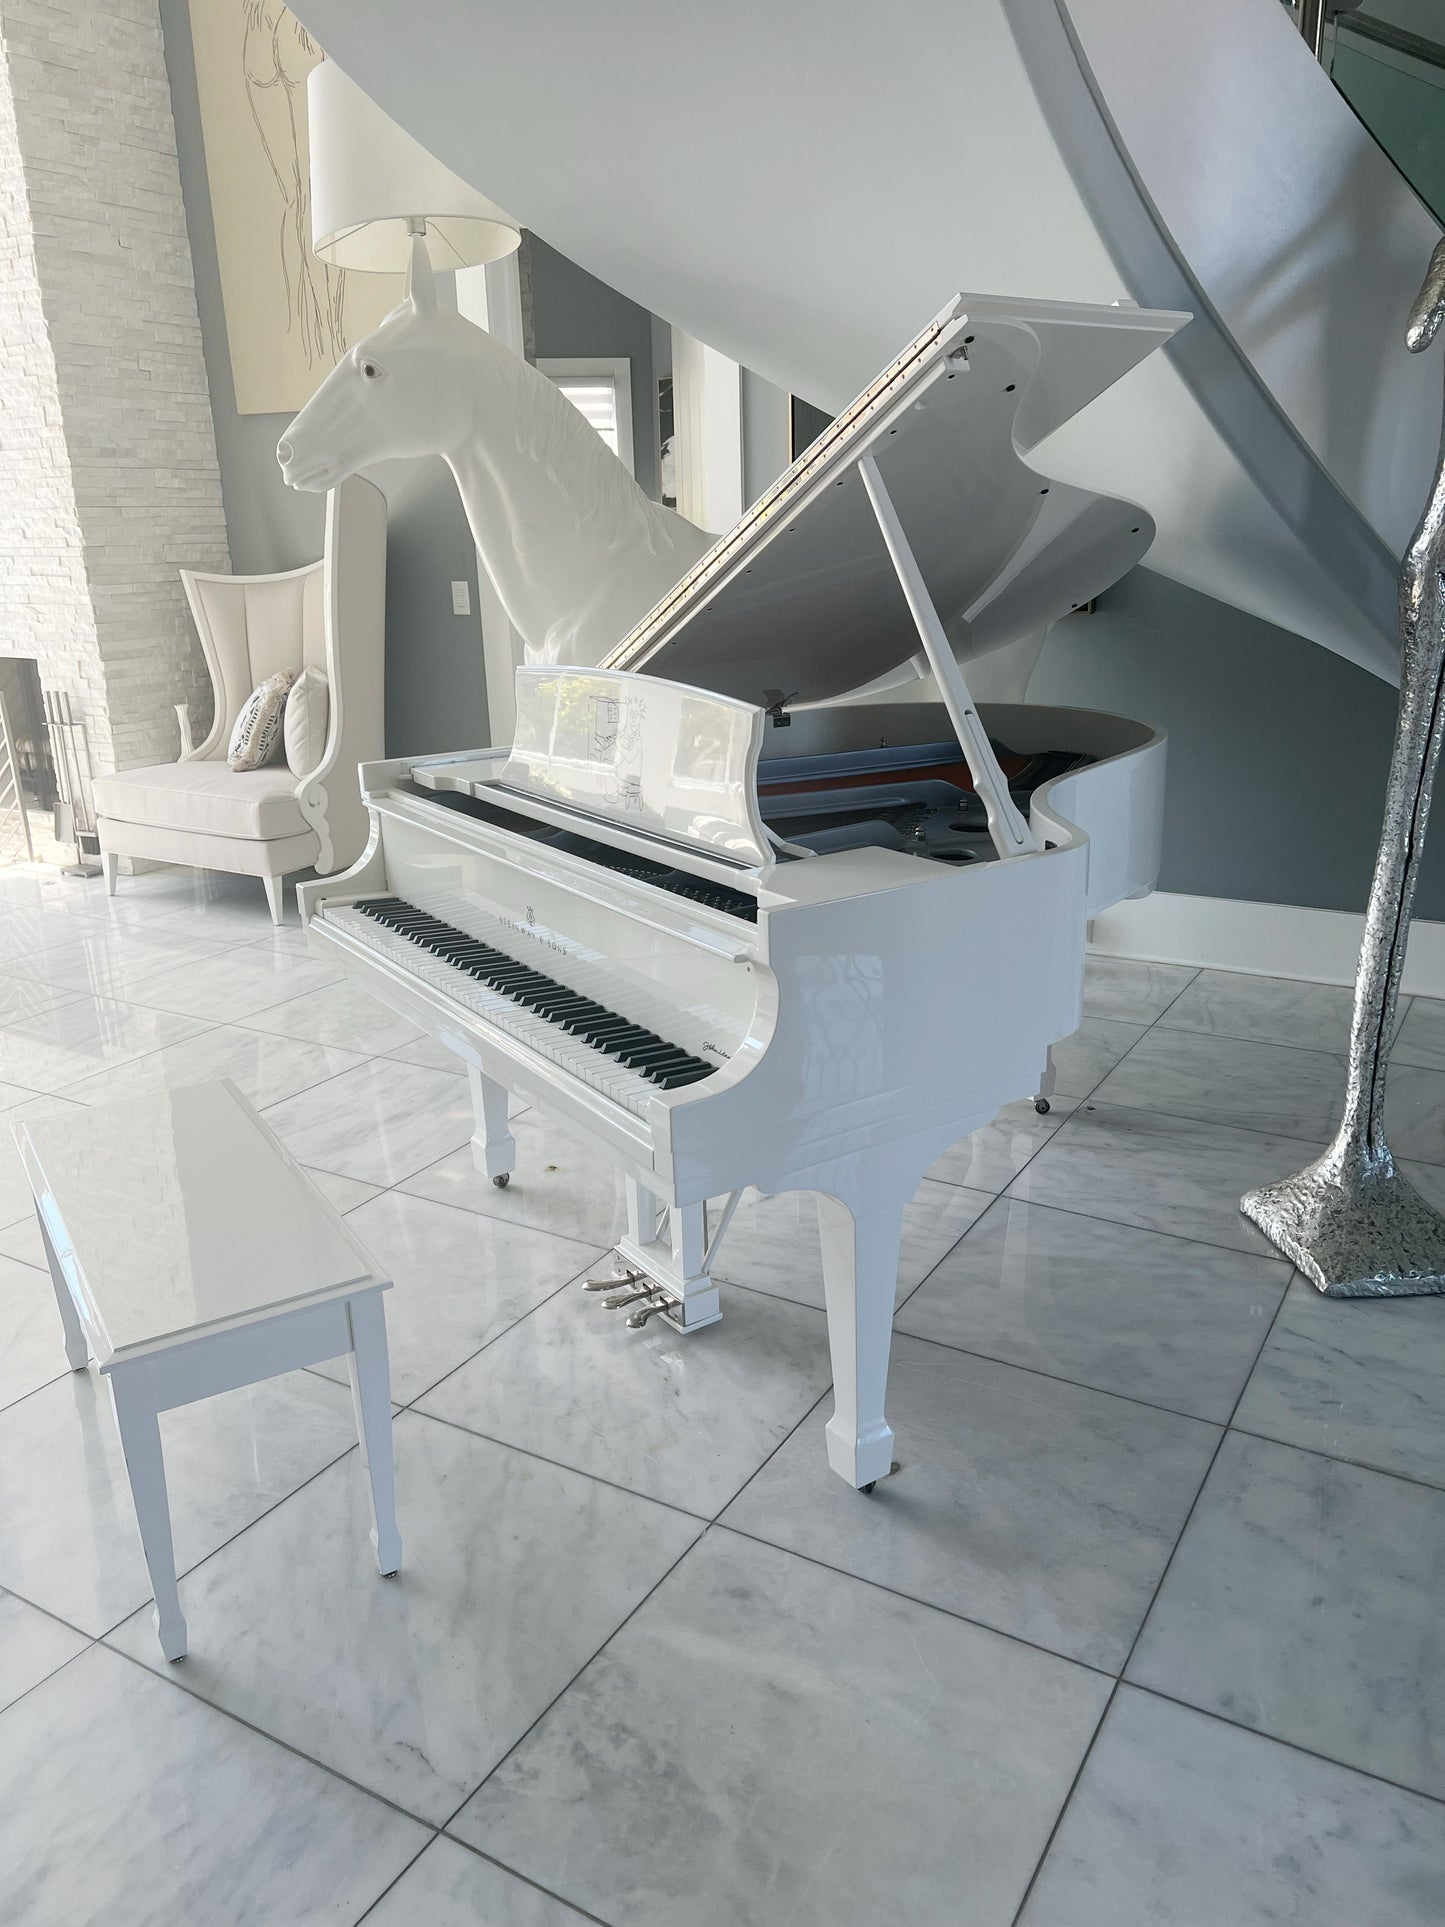 2015 John Lennon Extremely Limited Edition Steinway Model O | Sterling Silver